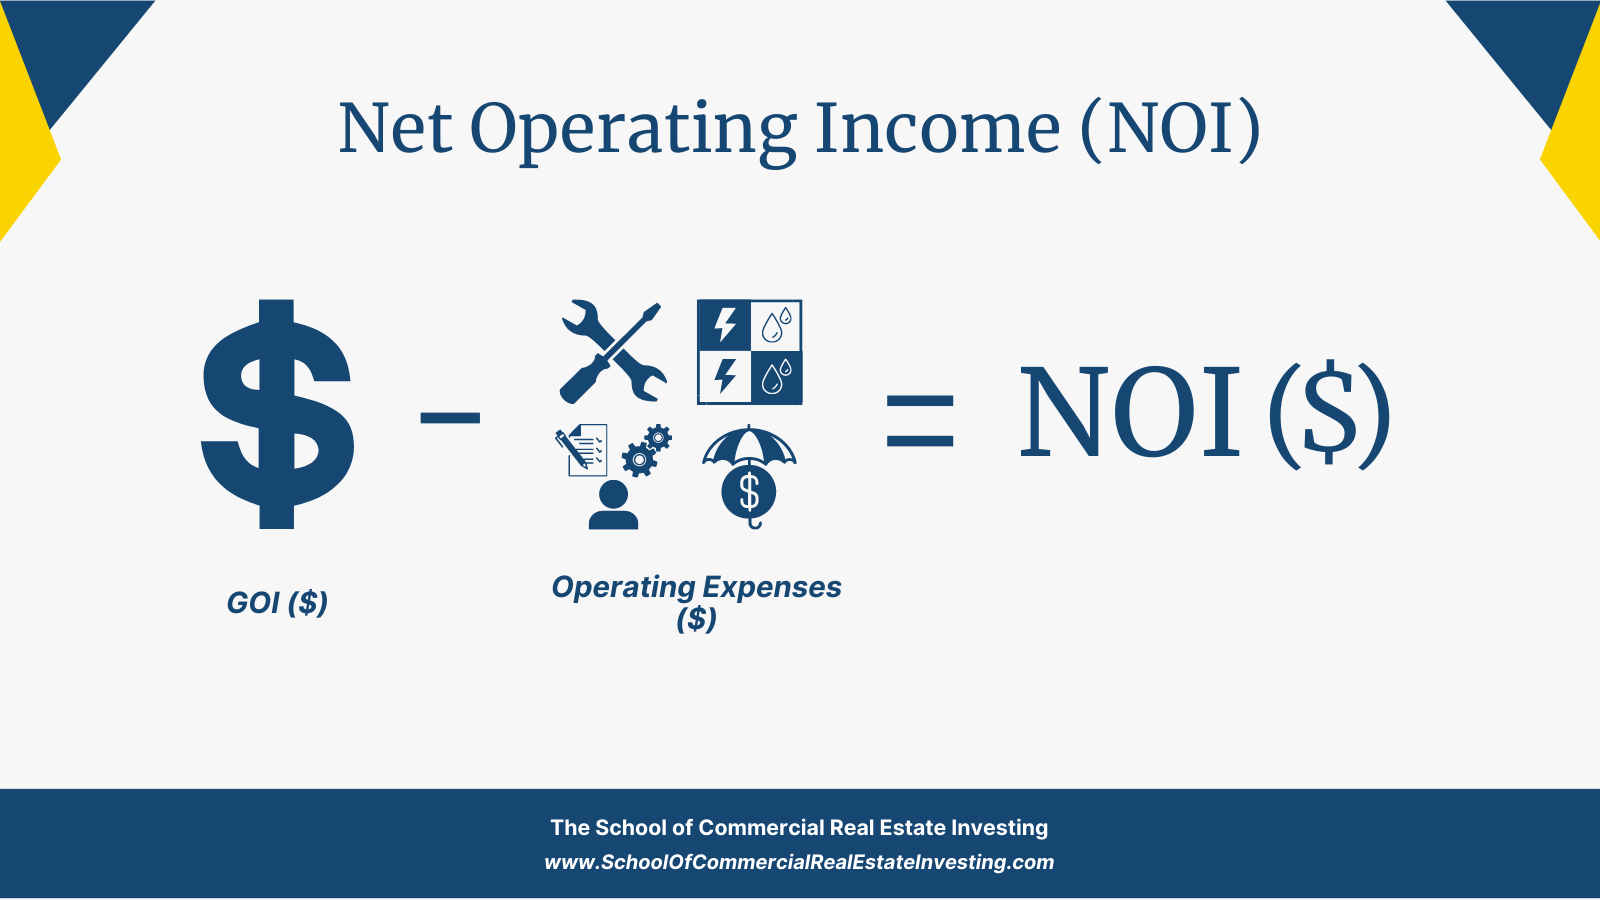 Calculate Net Operating Income (NOT) by subtracting all operating expenses from the gross operating income.